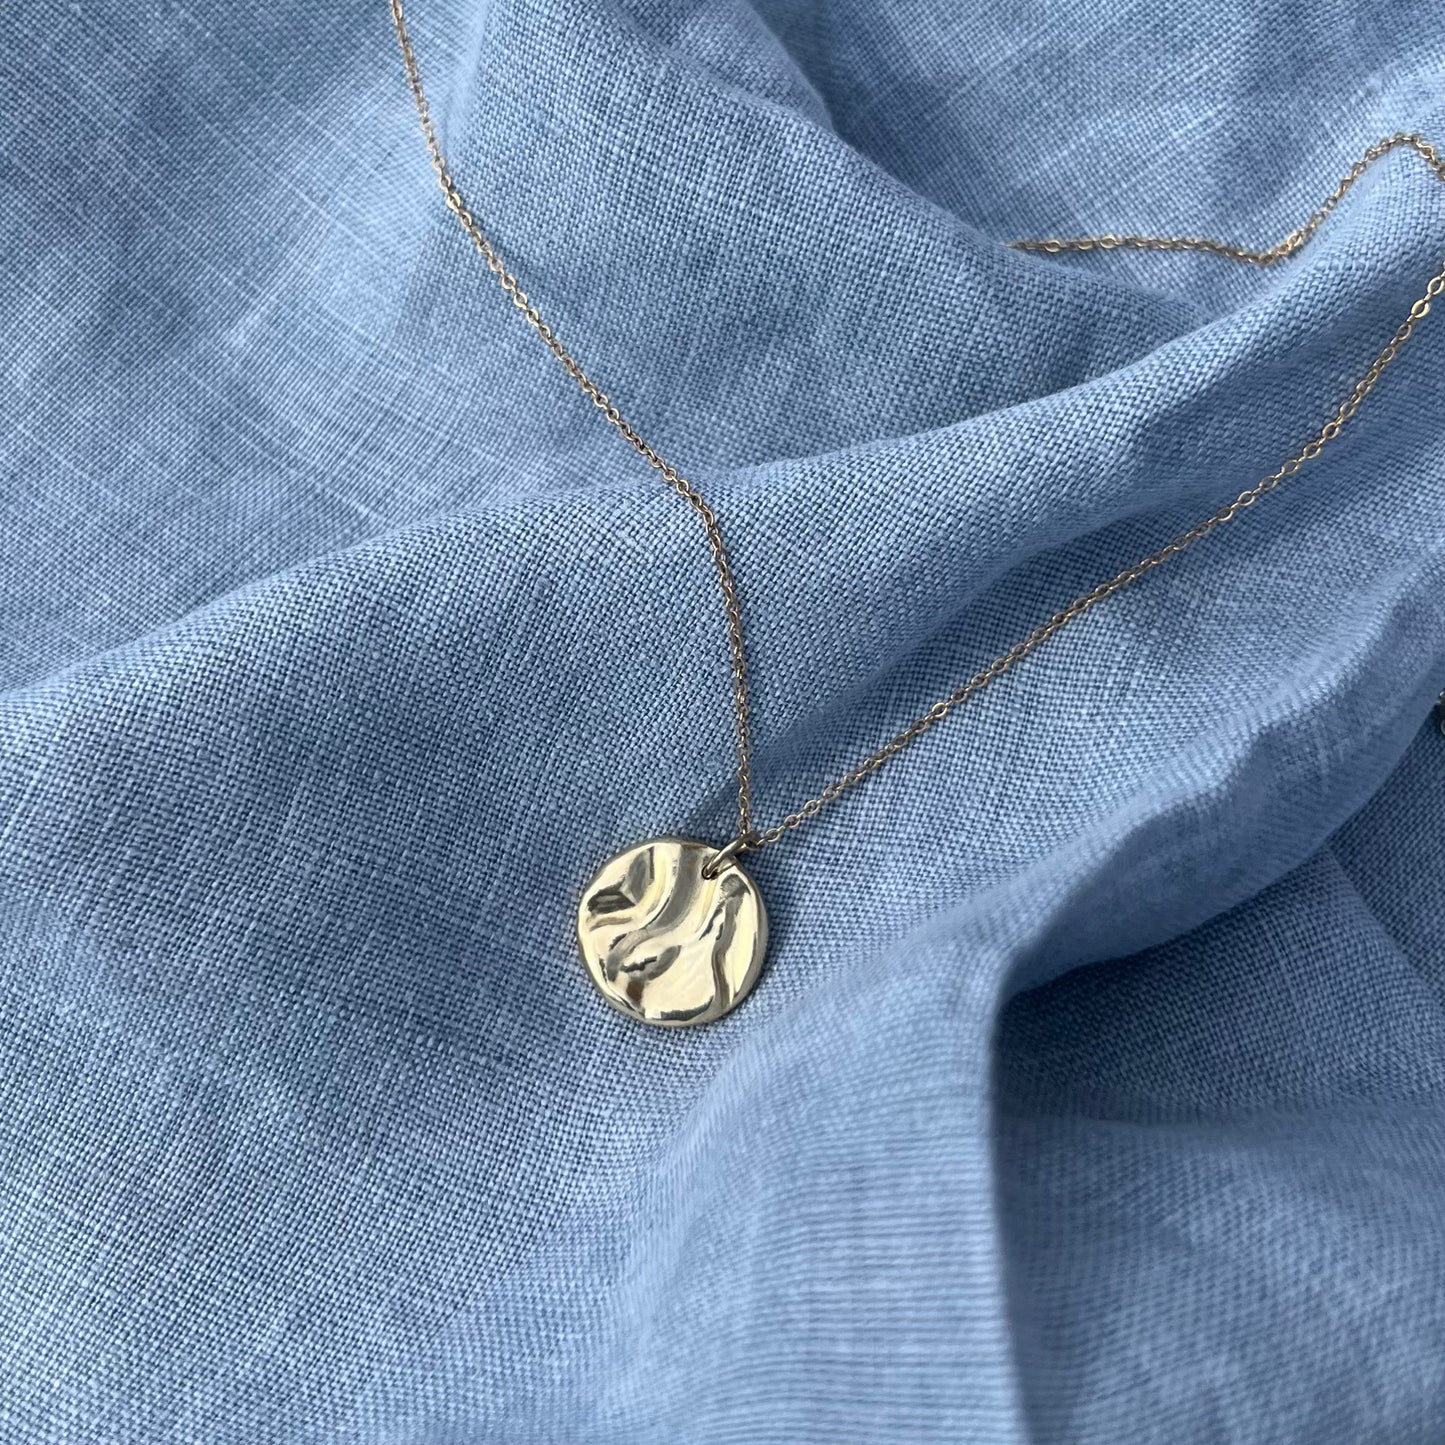 A handmade 'Rock-pool pendant" in recycled 9ct yellow gold. The pendant is on a chain and the background is of blue linen.